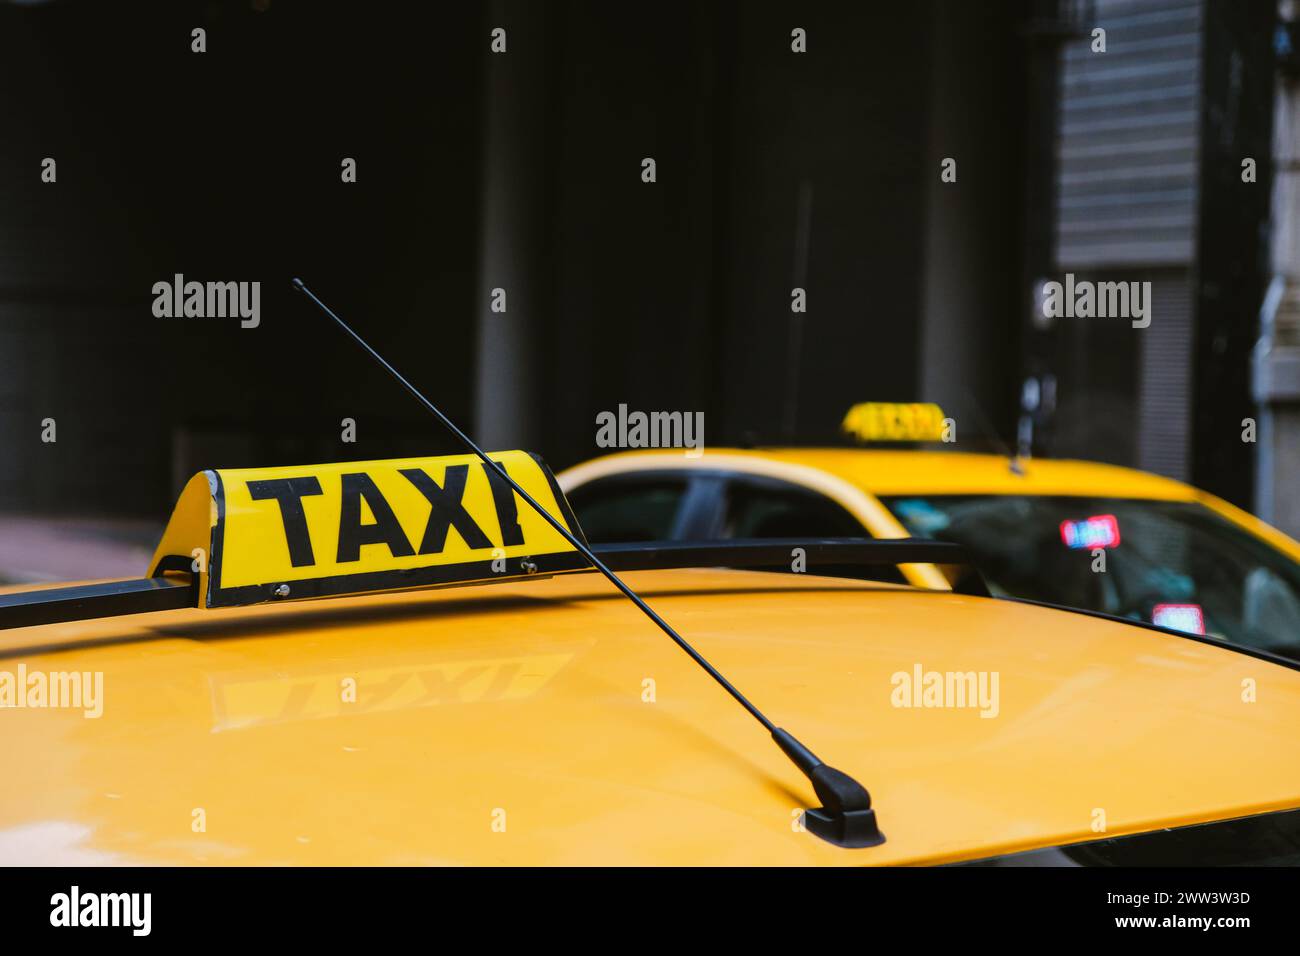 Taxi Sign. Taxis Of The City Of Rosario. Context Of Insecurity And A Lot Of Fear Due To The Current Drug Violence In Santa Fe, Argentina Stock Photo